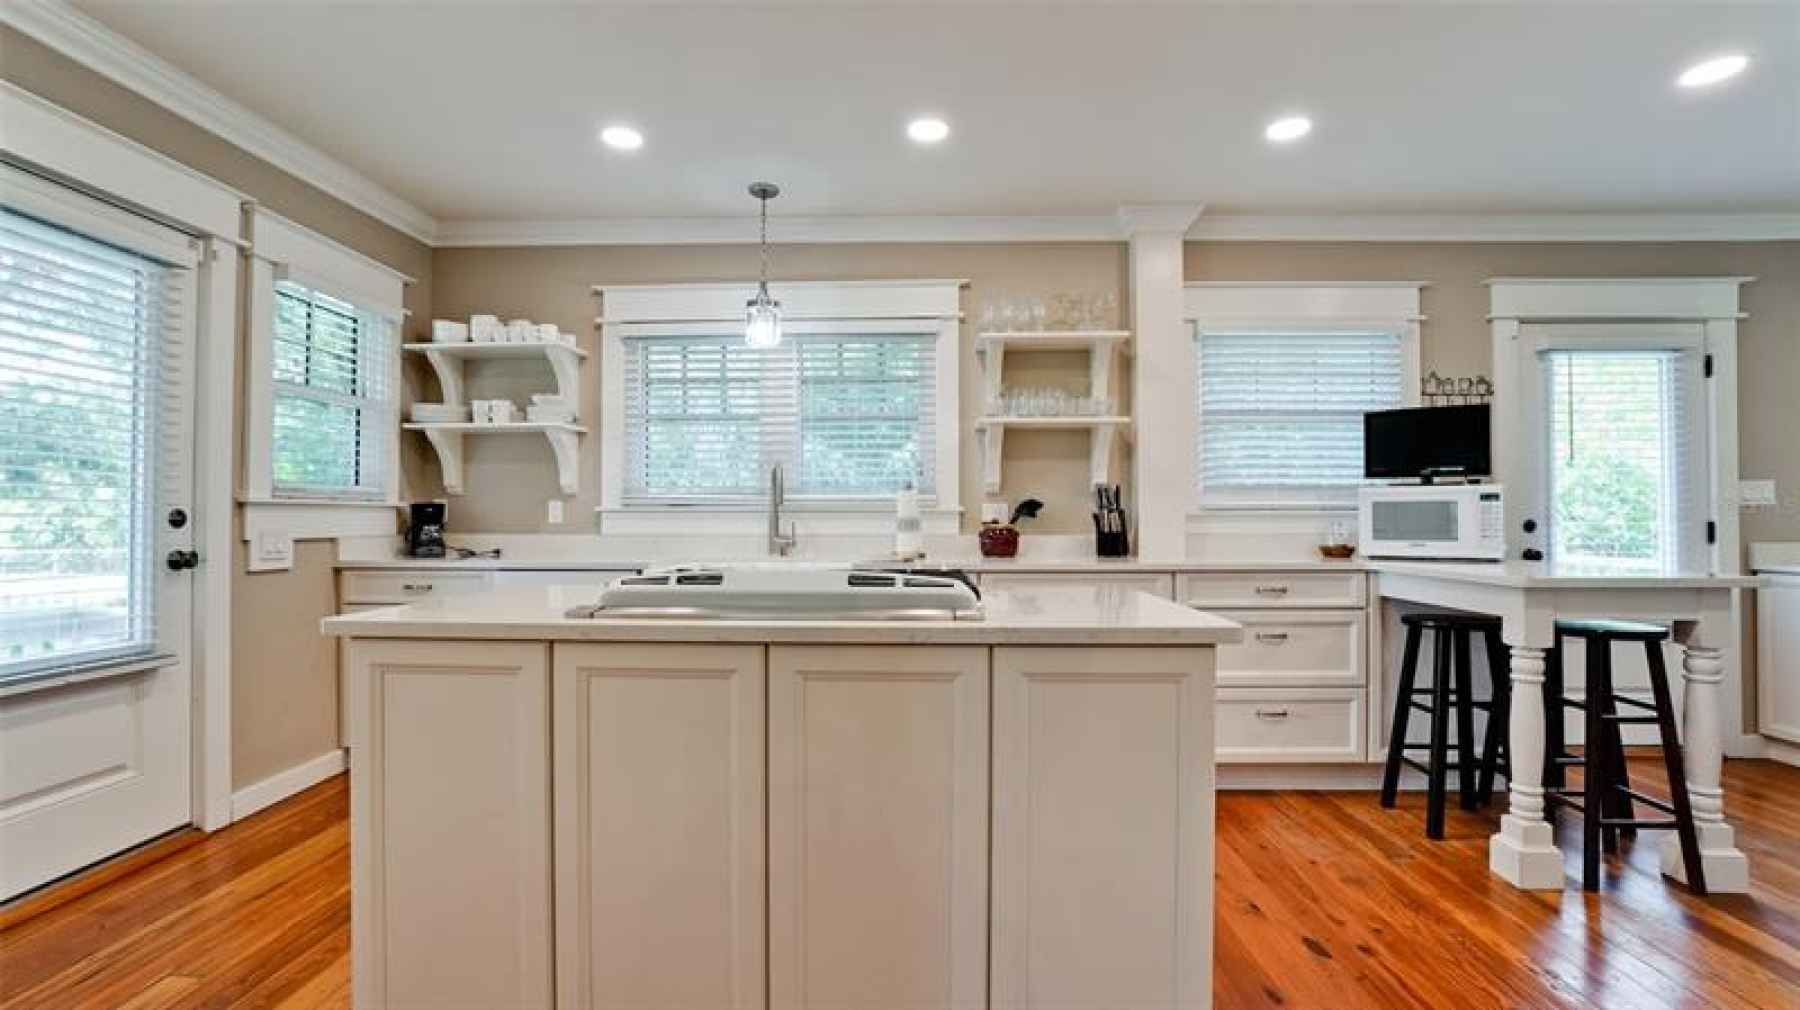 Ahh! Modern kitchen of your dreams in historic envelope. Cambria quartz counters and 5 burner gas st